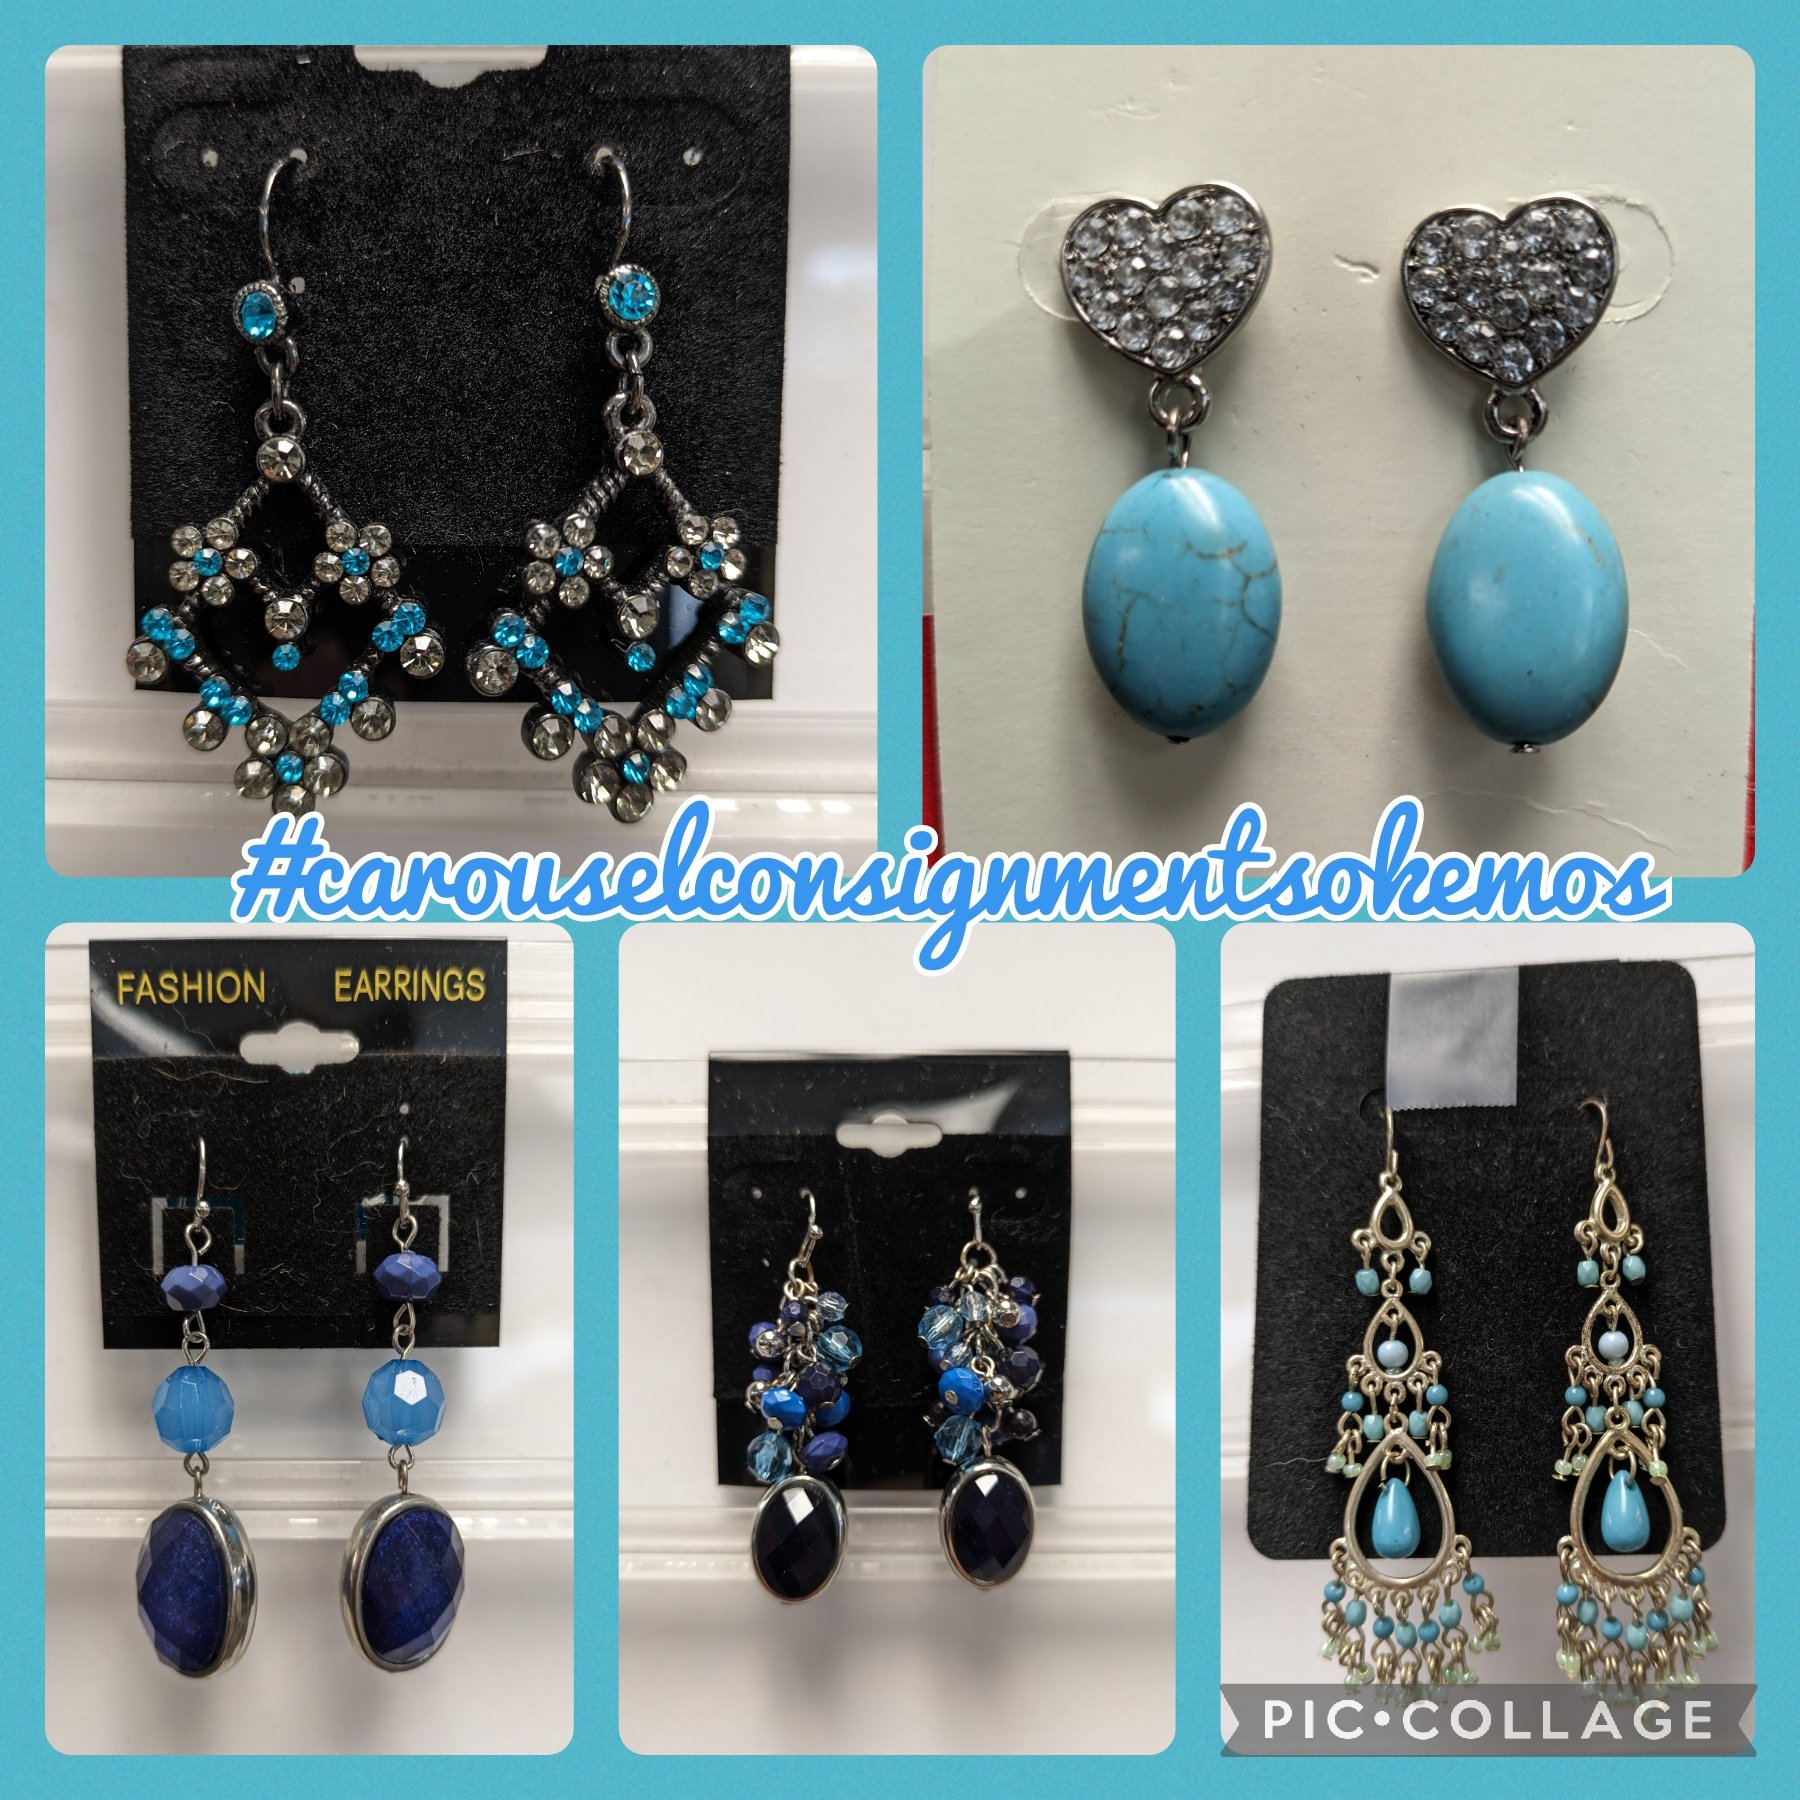 🎀Accessorize🎀
Clockwise from Top Left
Chandelier $7
Heart &amp; Turquoise $7
Tiered Turquoise $7
Jangled Blue Beads $6
3 Layered Beads $6
#carouselconsignmentsokemos #shoplocal #shopsmall #shopsmallbusiness #resalenotretail #shopconsignment #shopse